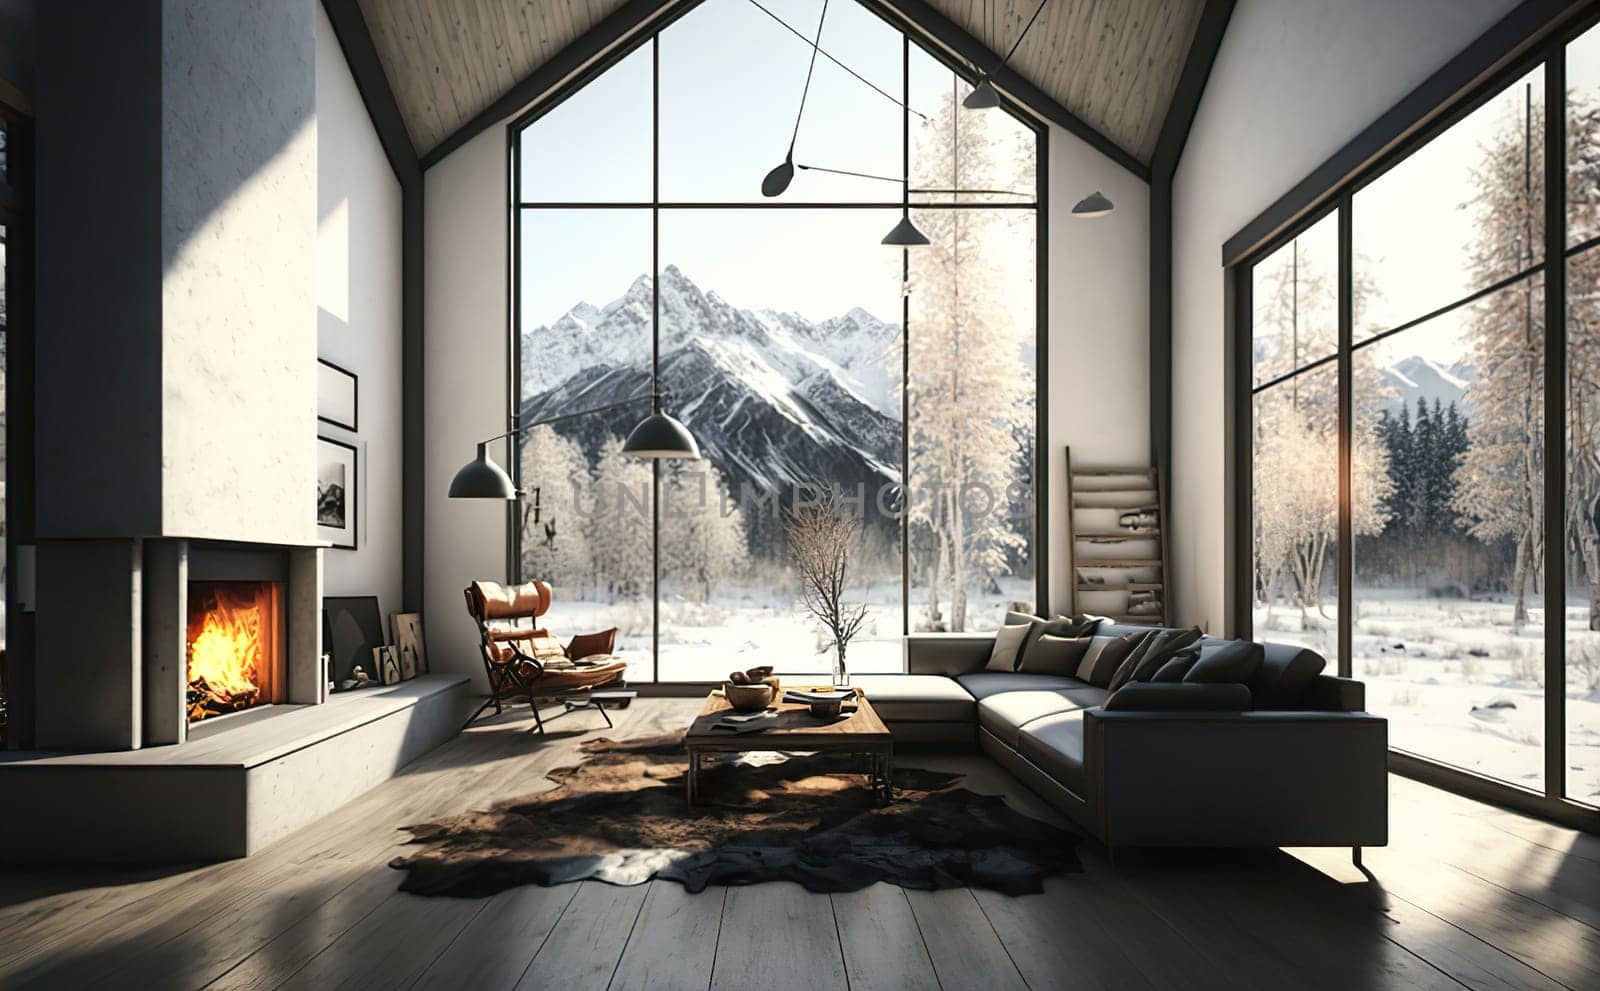 Modern Mountain Chalet - Cozy Fireplace Ambiance with Snow by Jyliana